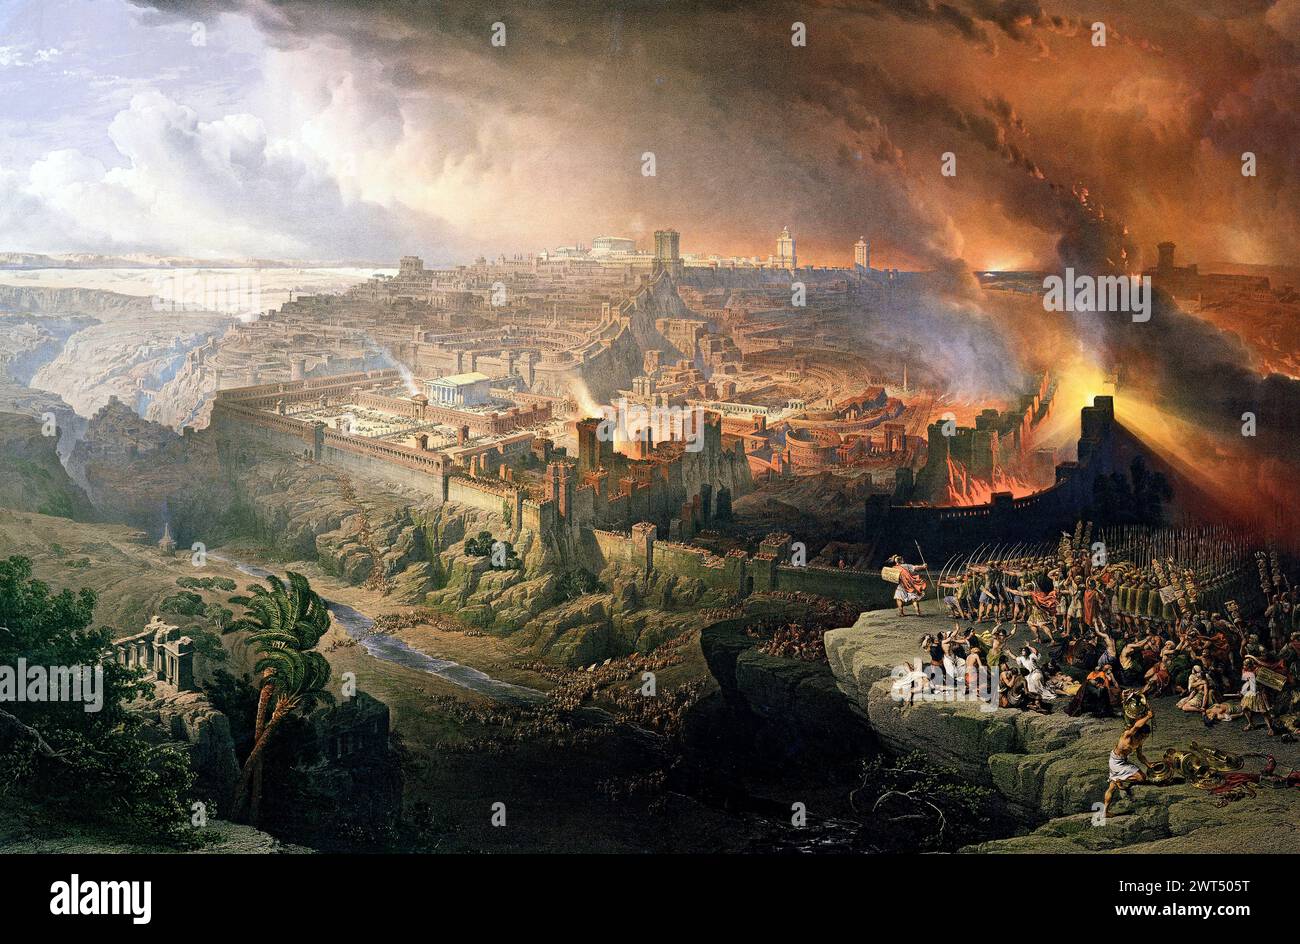 The Siege and Destruction of Jerusalem by the Romans Under the Command of Titus, A.D. 70 - David Roberts Stock Photo